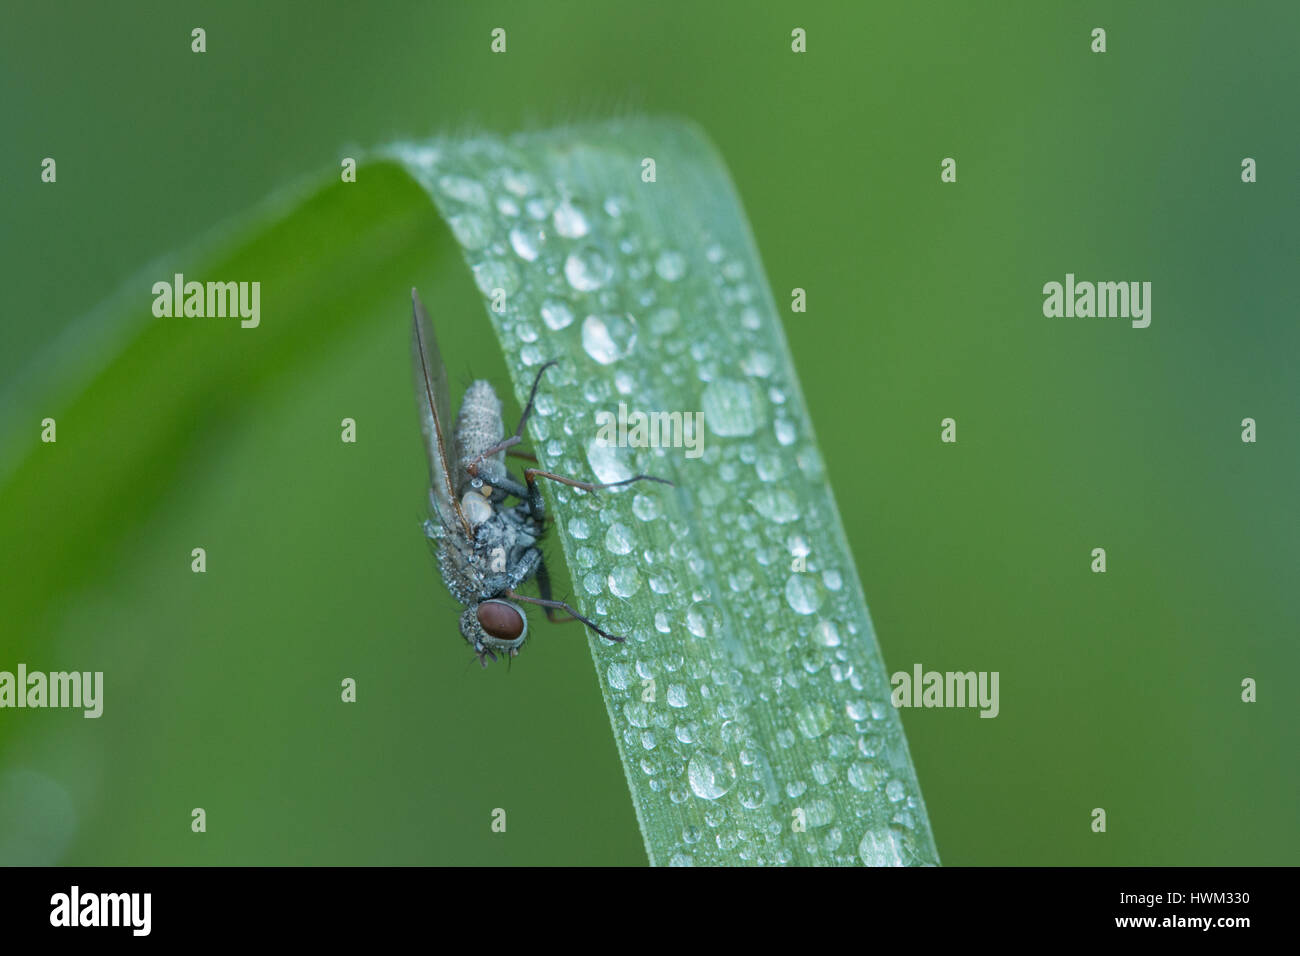 Close up of an insect on green leaf Stock Photo